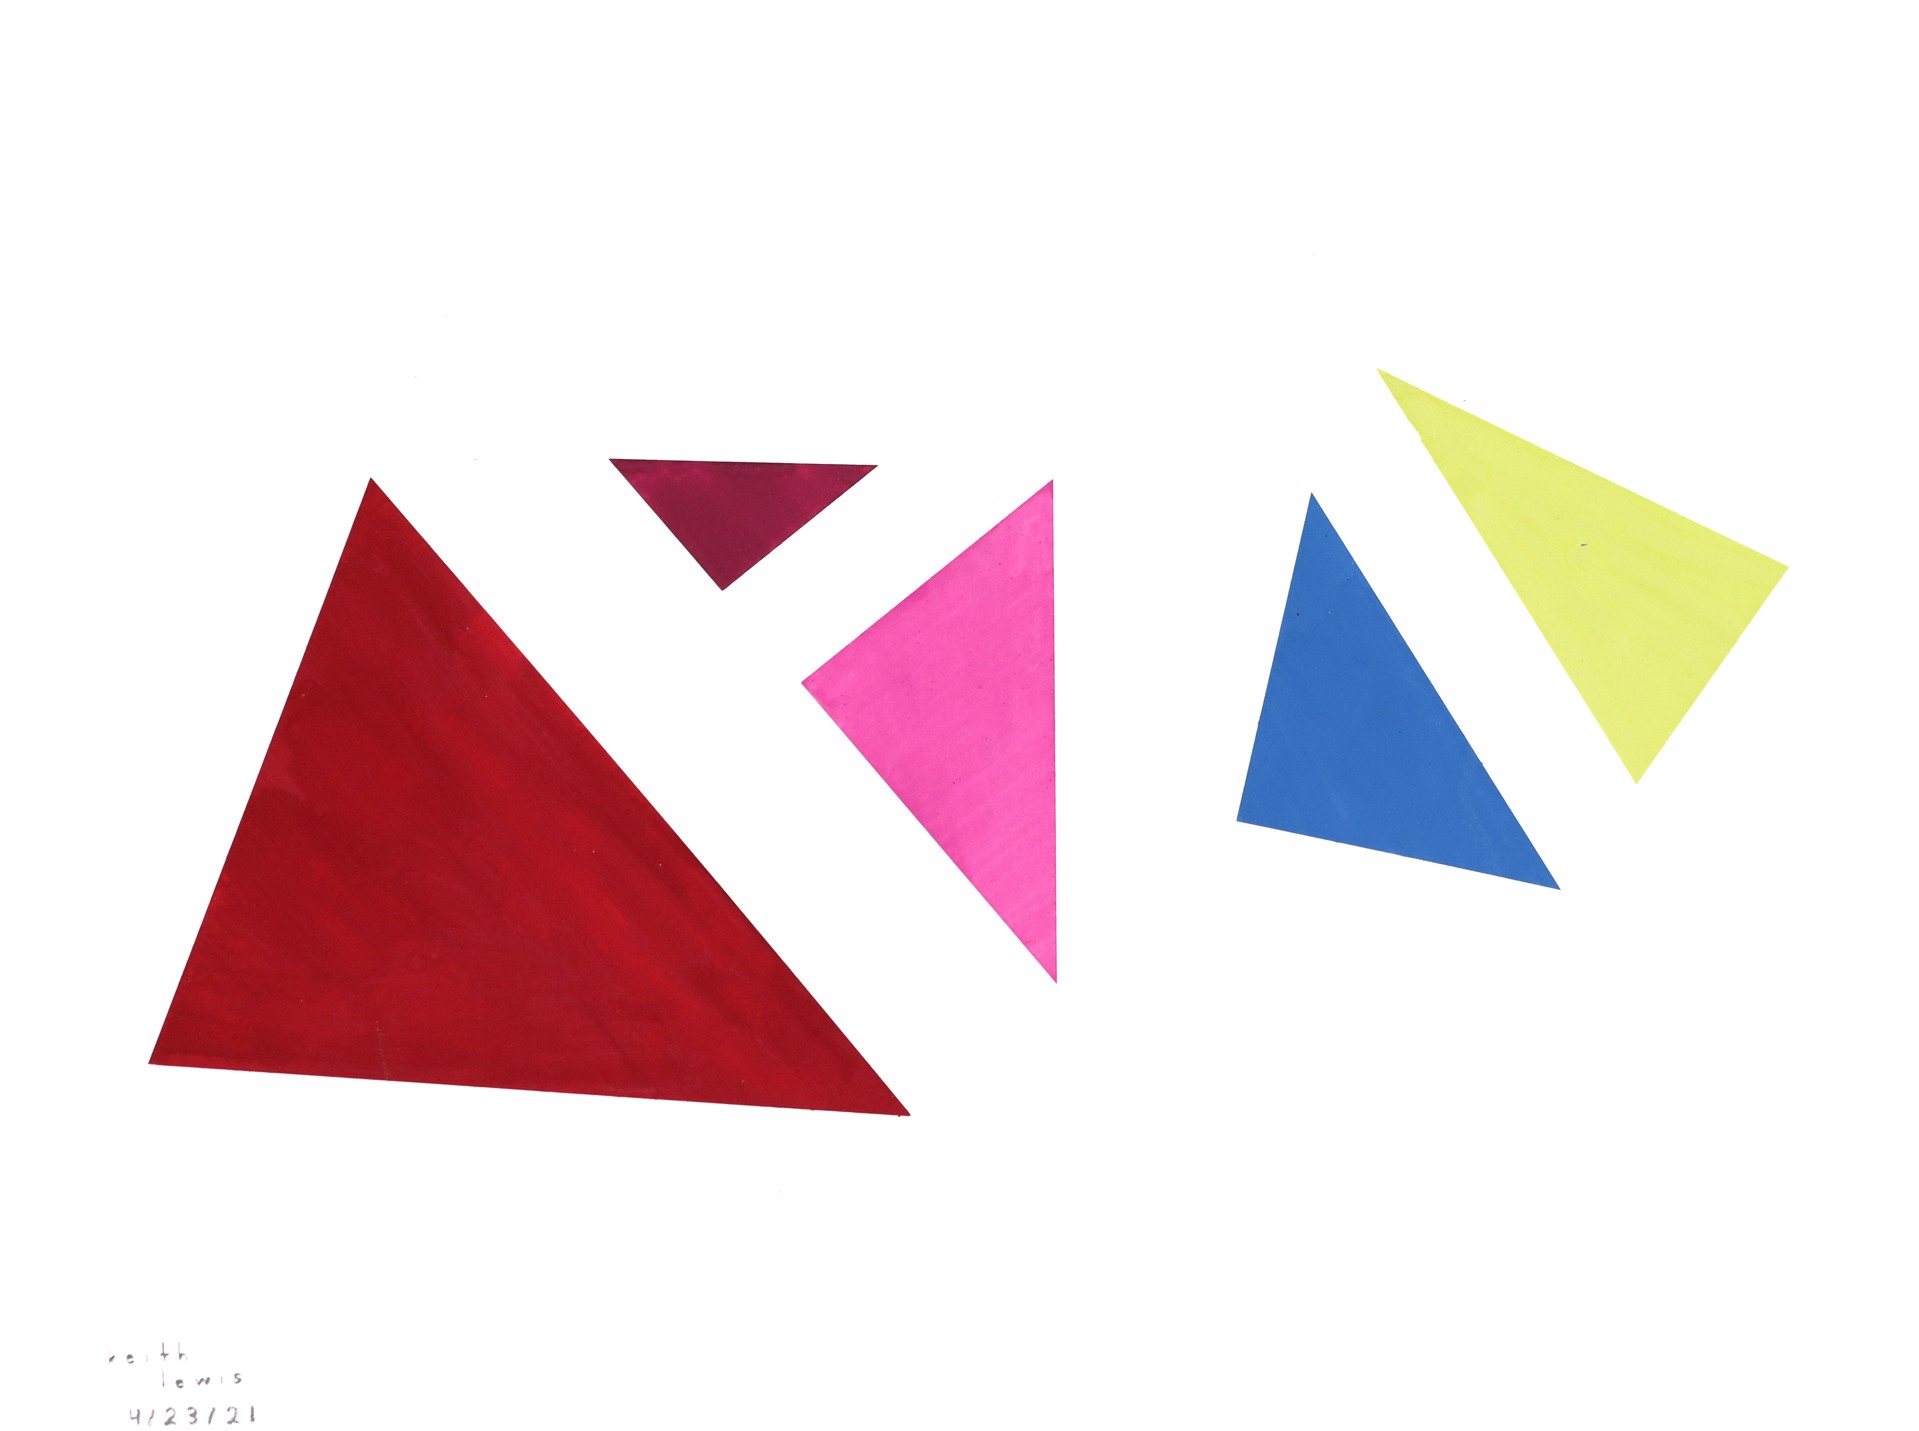 Untitled (Triangles) by Keith Lewis